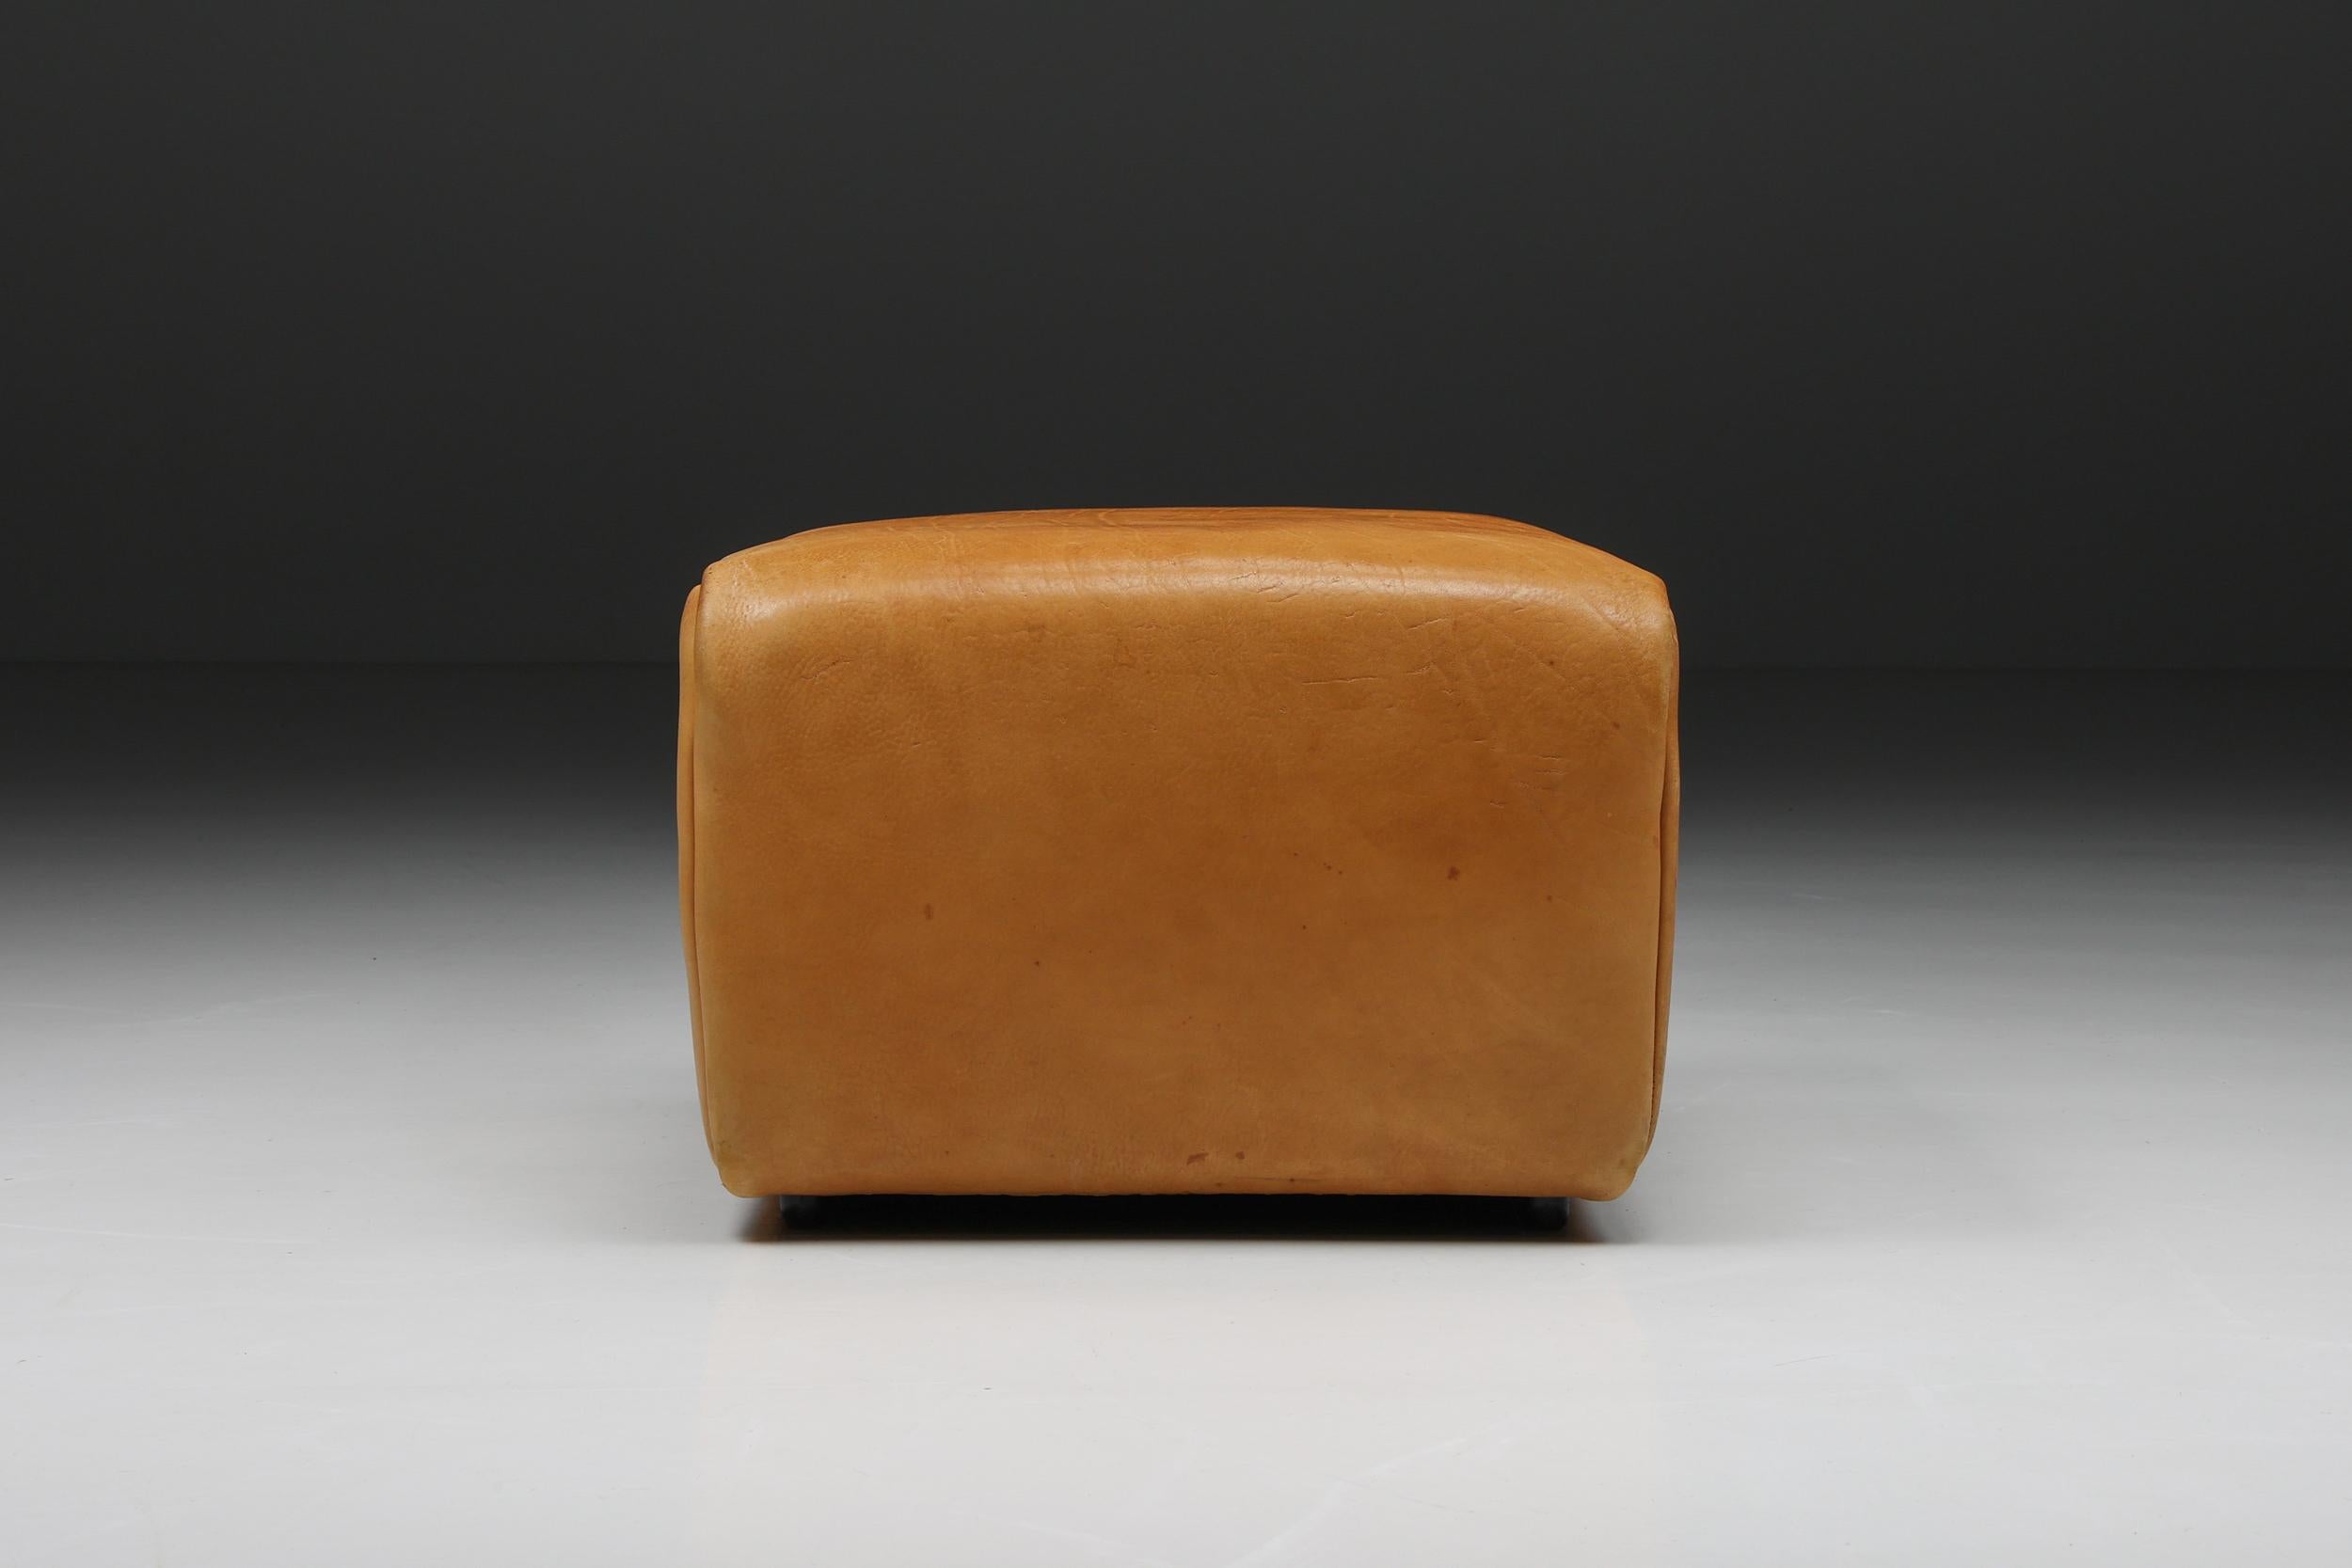 De Sede DS 47 cognac leather ottoman, stool, Swiss design, 1970's.

Cognac leather ottoman by Swiss manufacturer De Sede. The DS models are true design Classics and are still in production. This is an original ottoman with tons of character and a